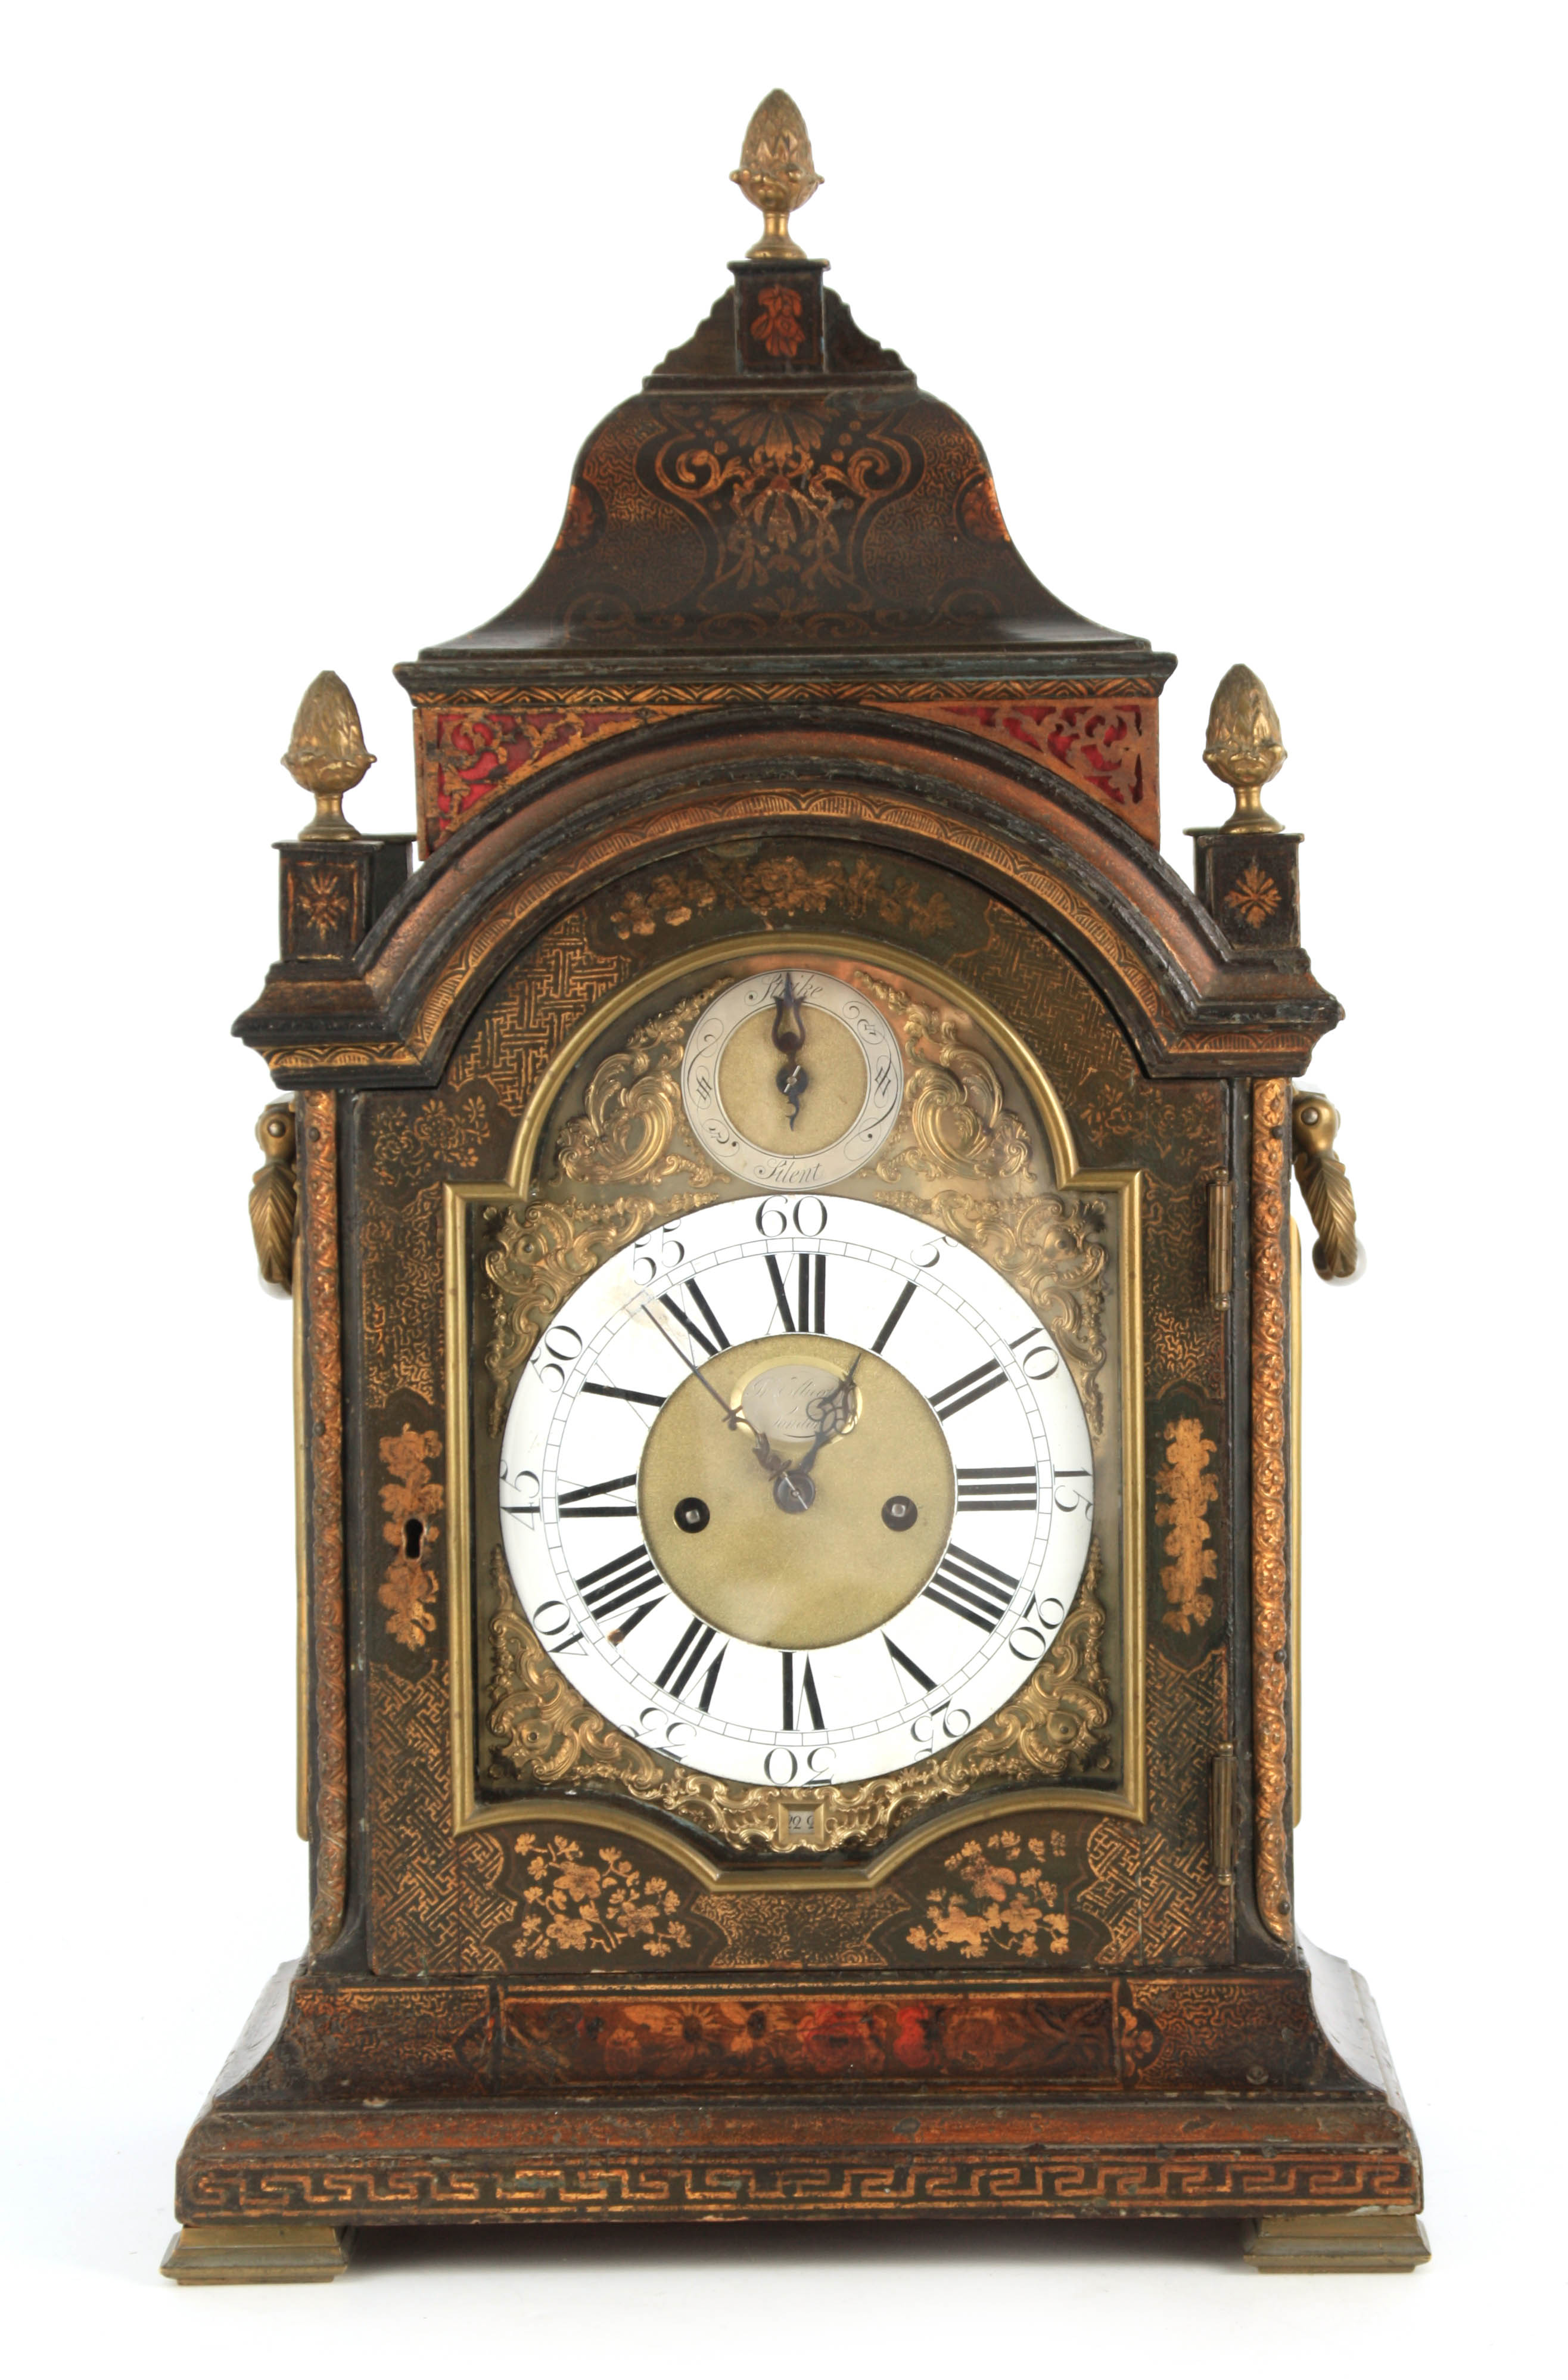 JOHN ELLICOTT, LONDON. A FINE GEORGE II GREEN LACQUER CHINOISERIE BRACKET CLOCK the bell top case